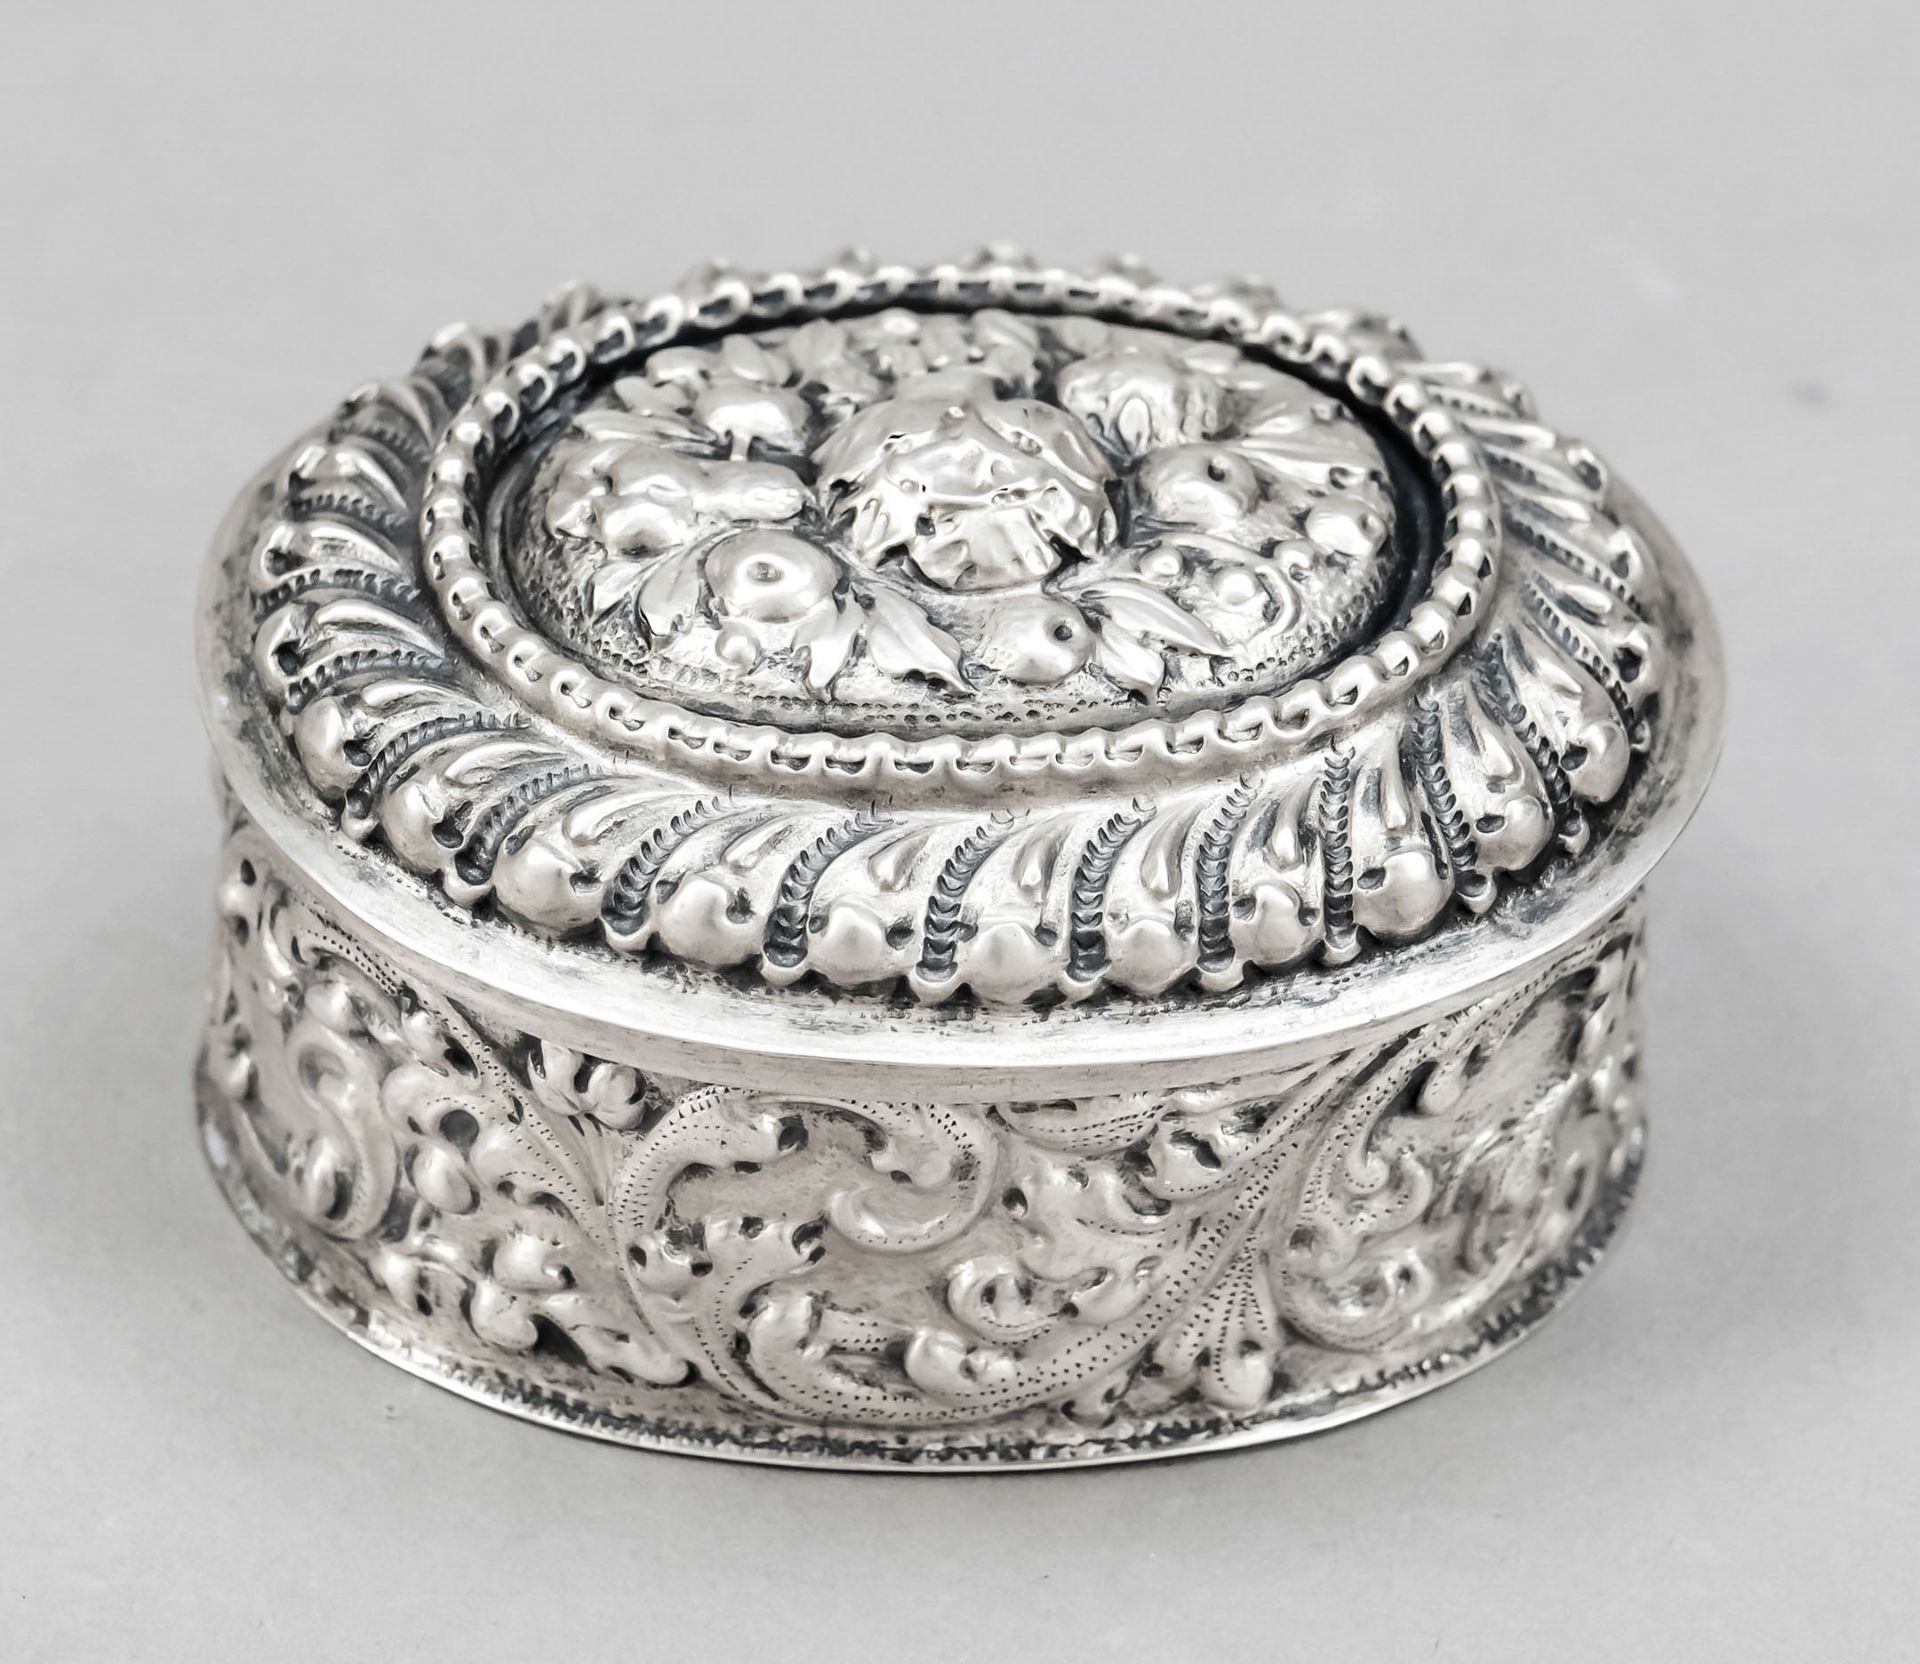 Oval lidded box, 19th century, silver tested, straight body, domed plug-in lid, wall with rich